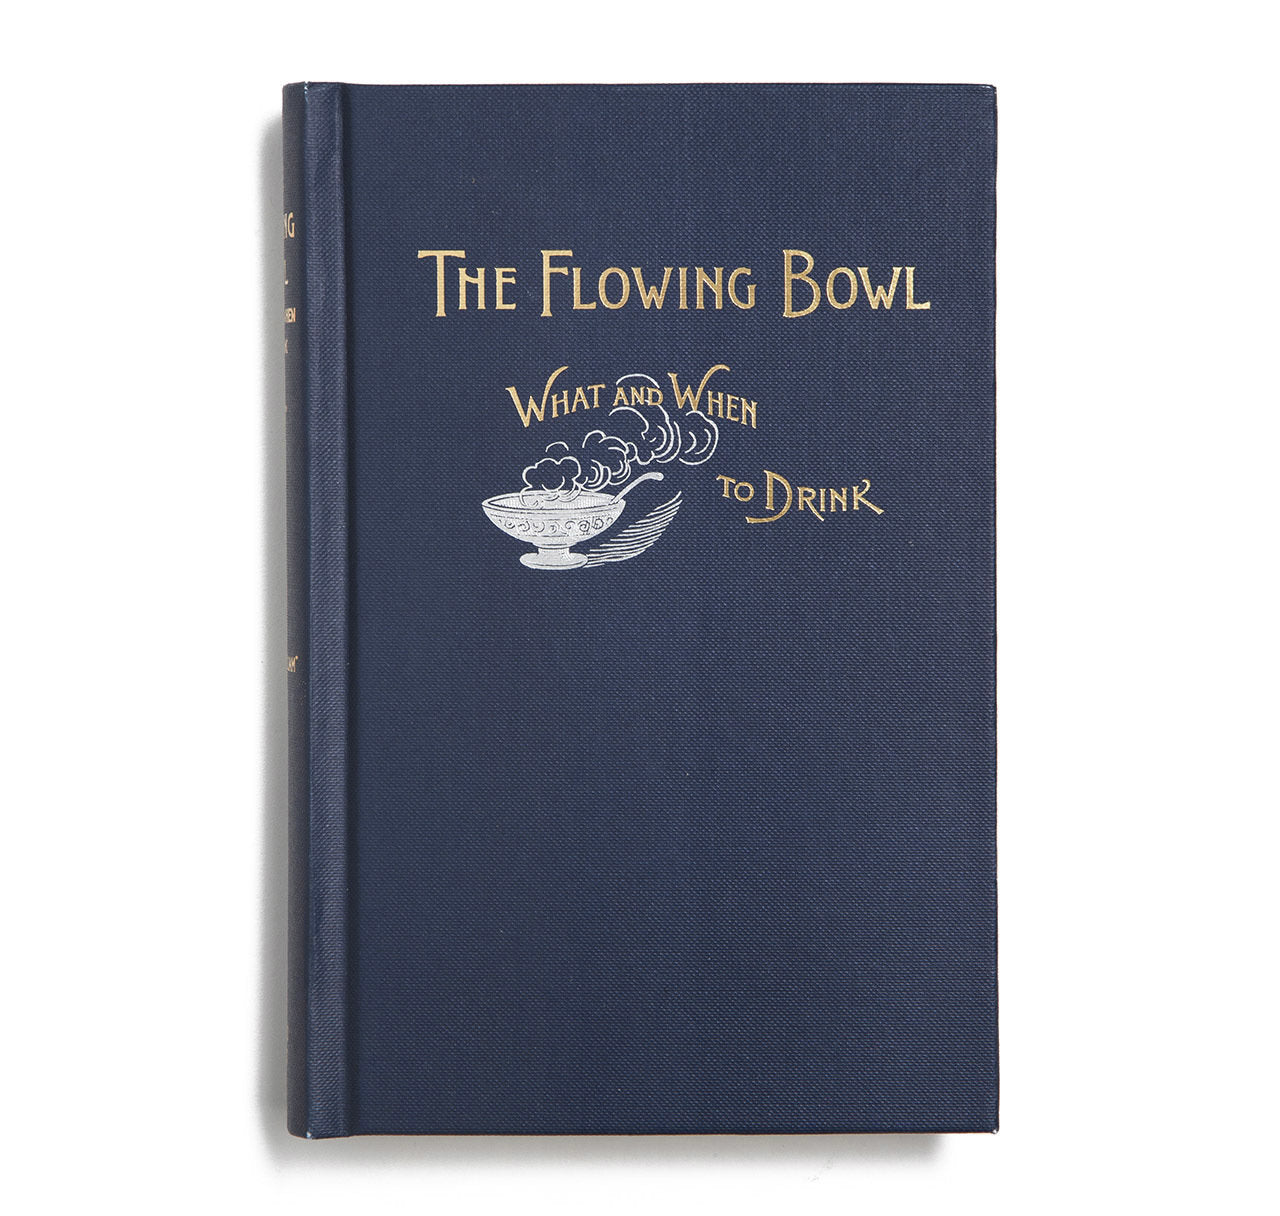 The Flowing Bowl by The Only William